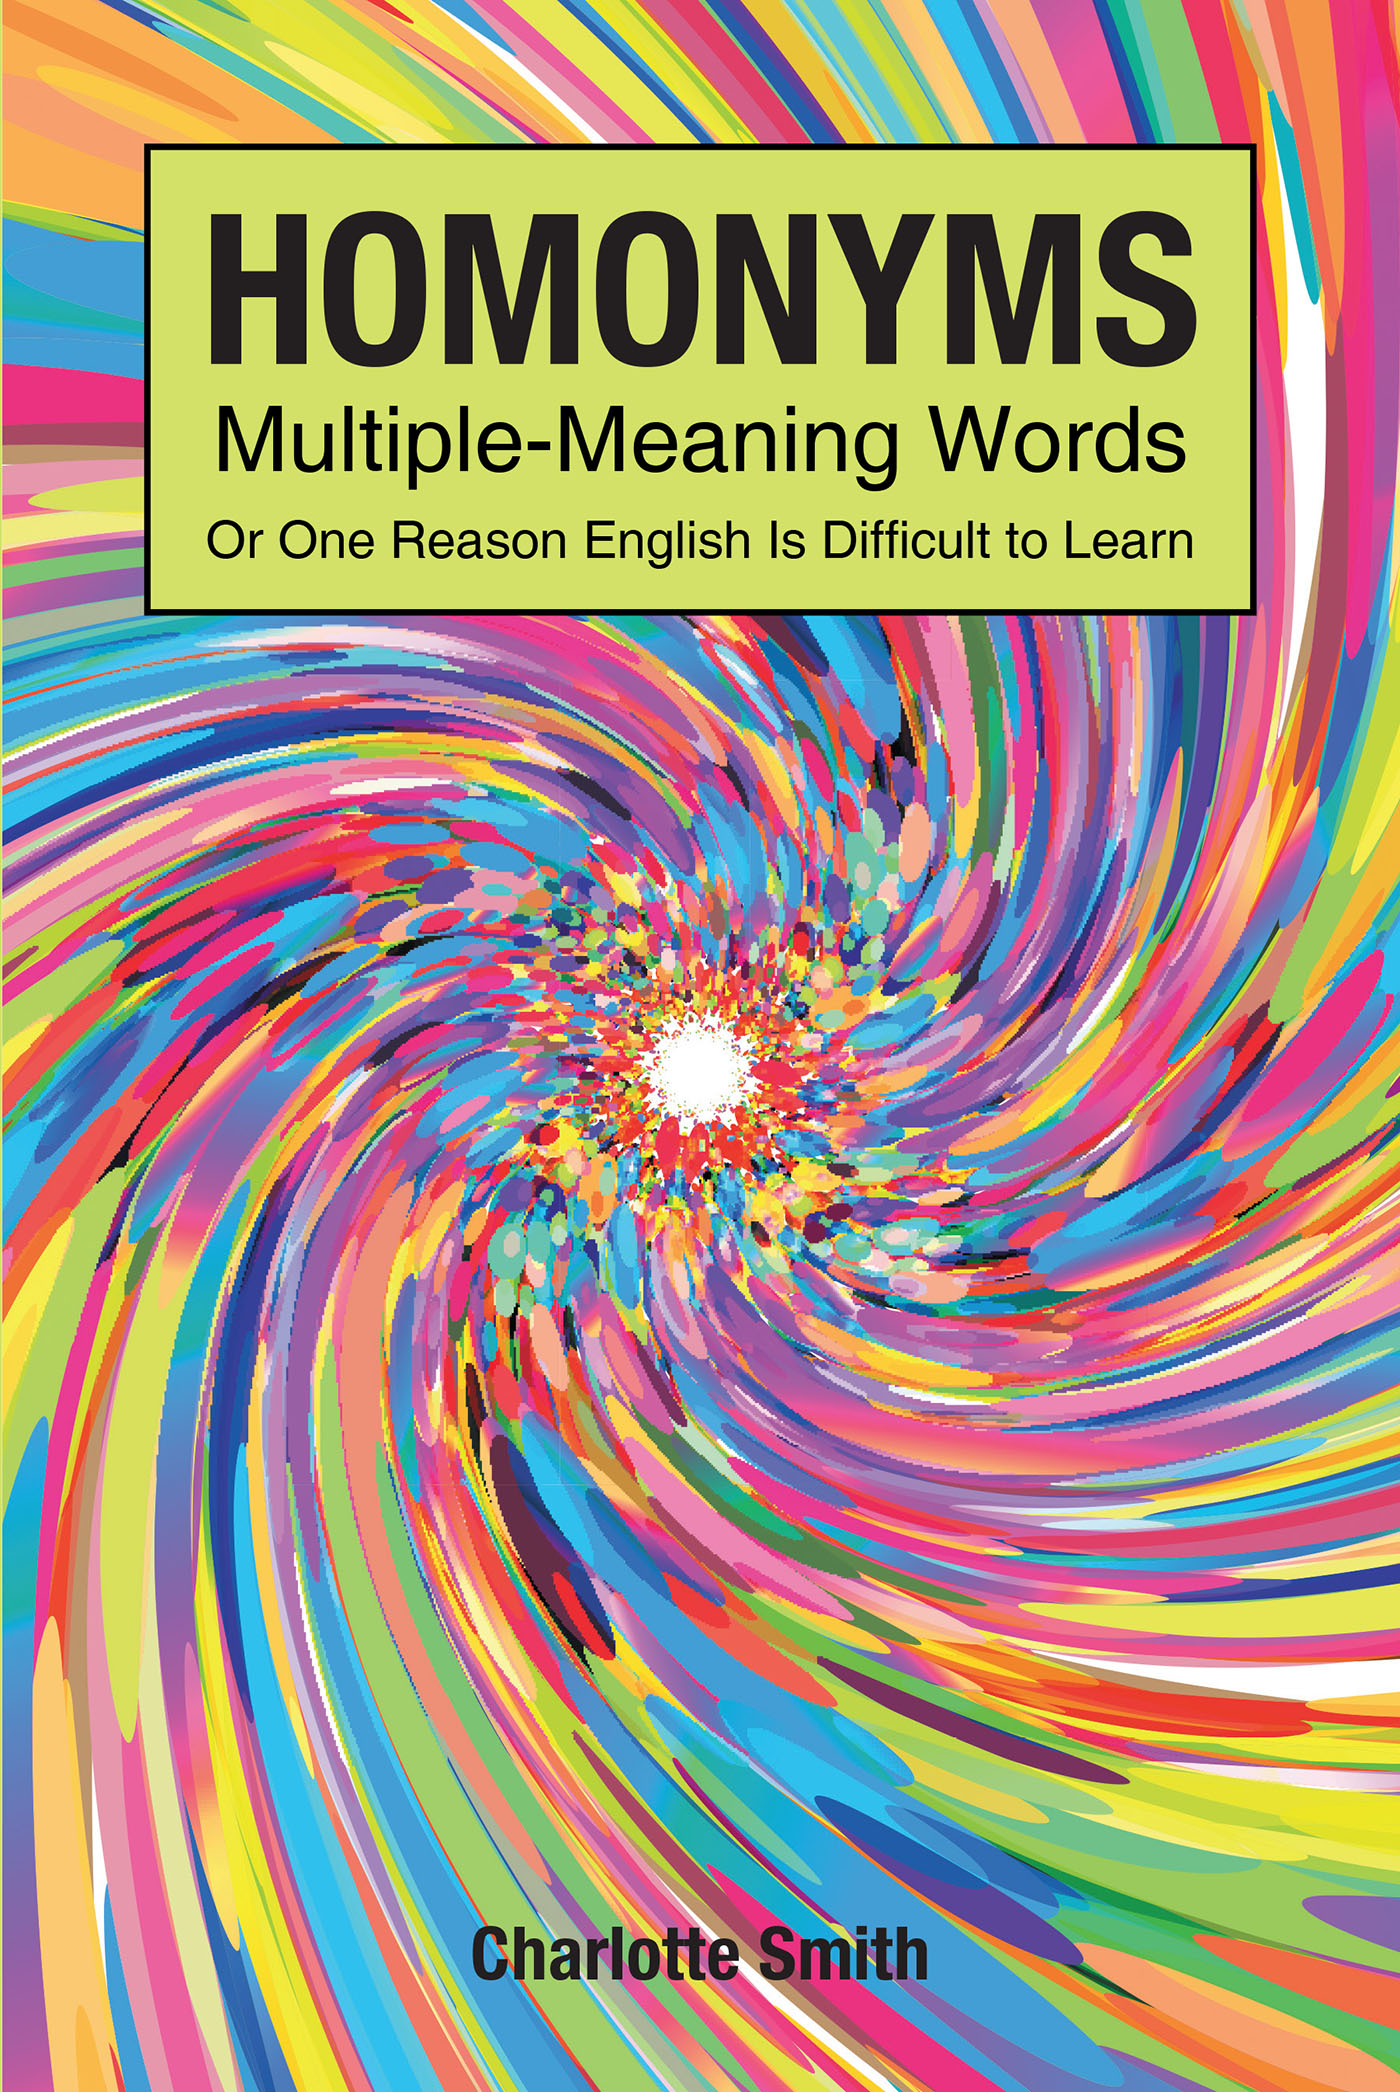 Author Charlotte Smith’s New Book, "Homonyms; Multiple-Meaning Words," Dives Into Tricky Words That Sound Alike But Mean Very Different Things